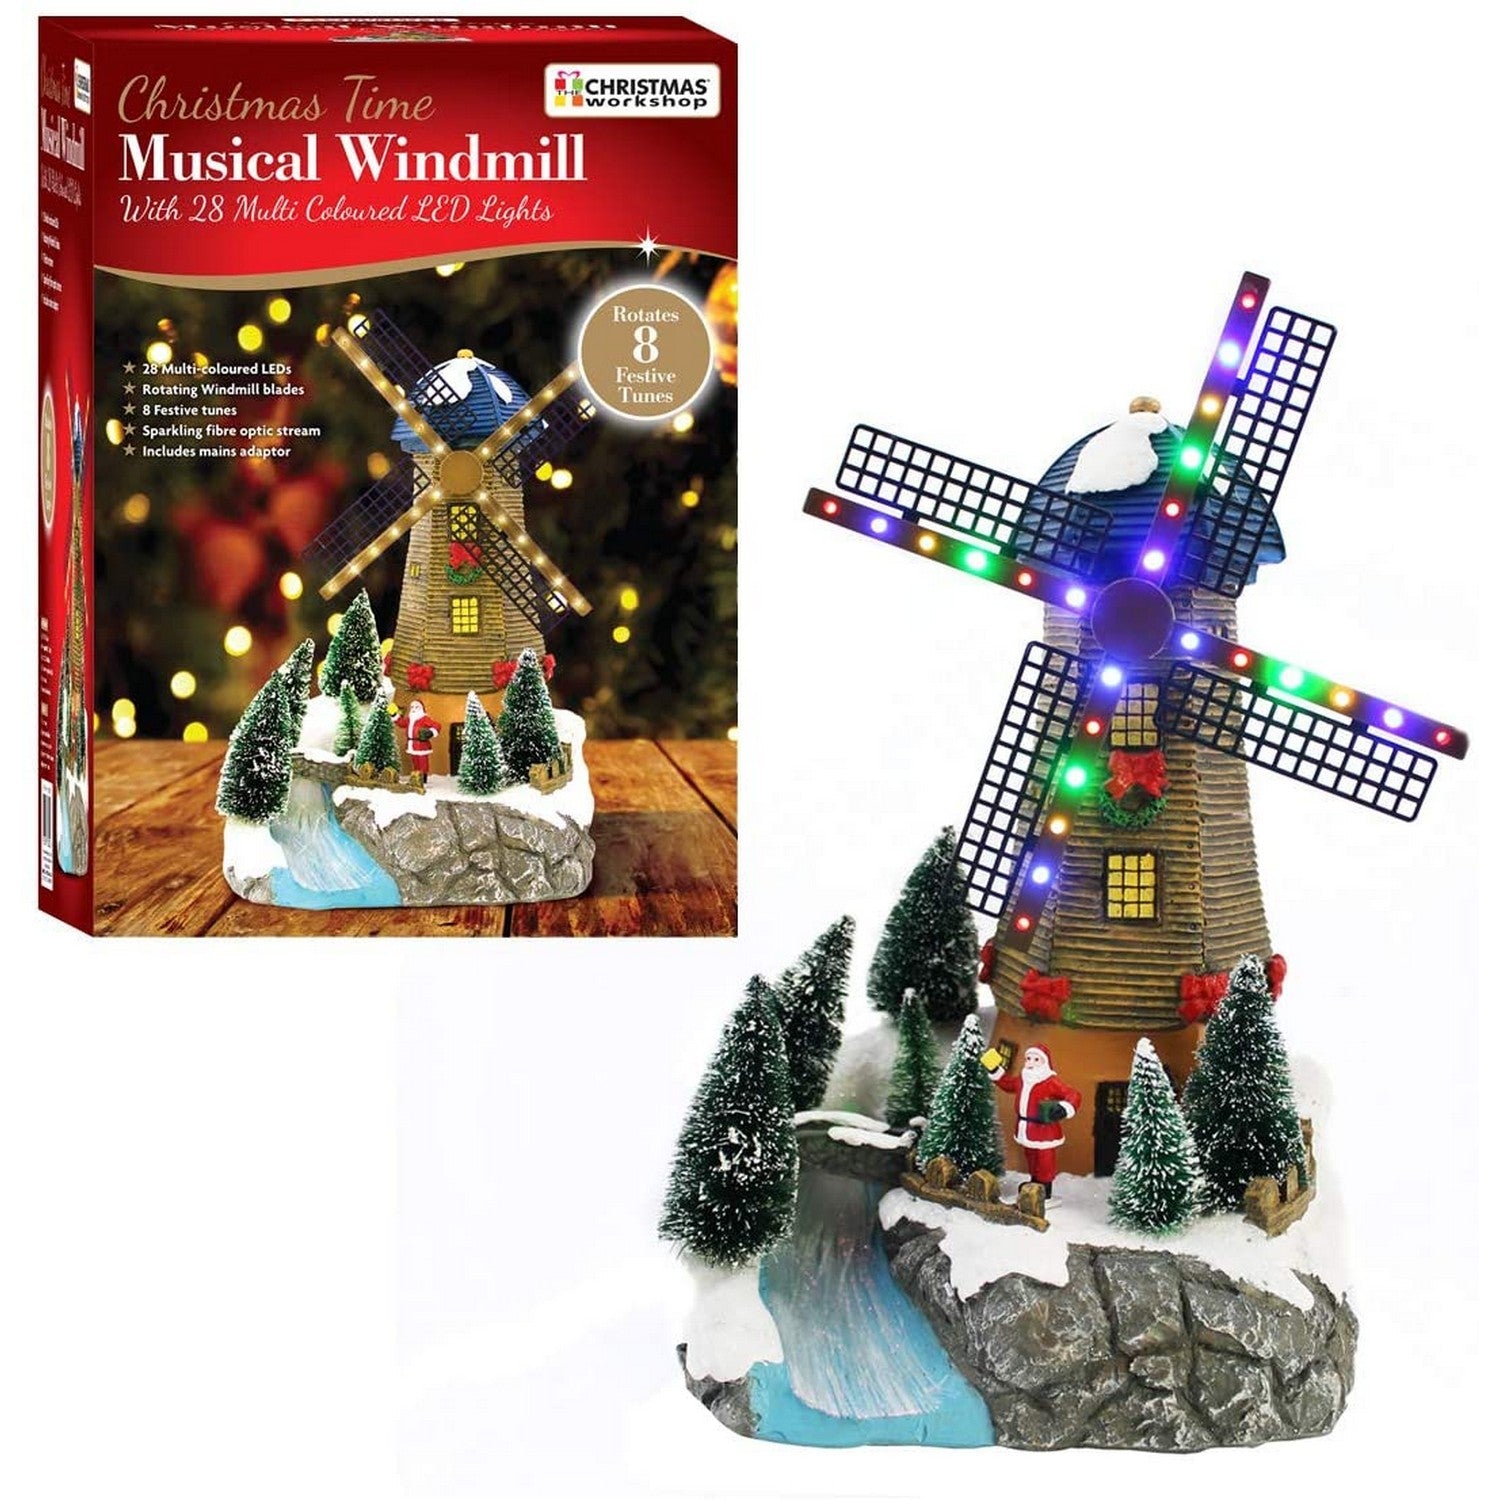 The Christmas Workshop Multi-Coloured LED Lights Musical Windmill